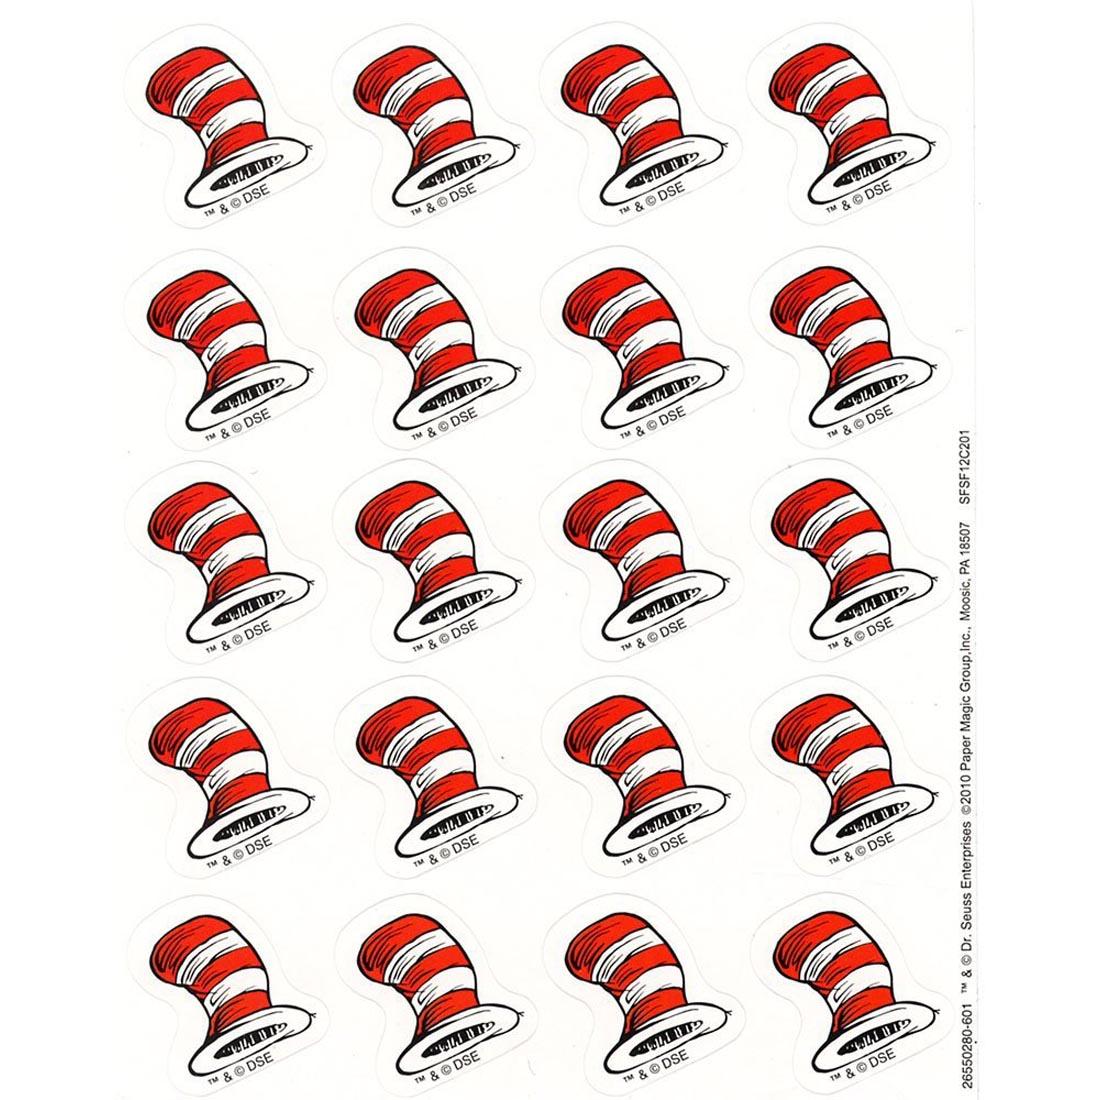 Dr. Seuss The Cat's Hat Stickers by Eureka